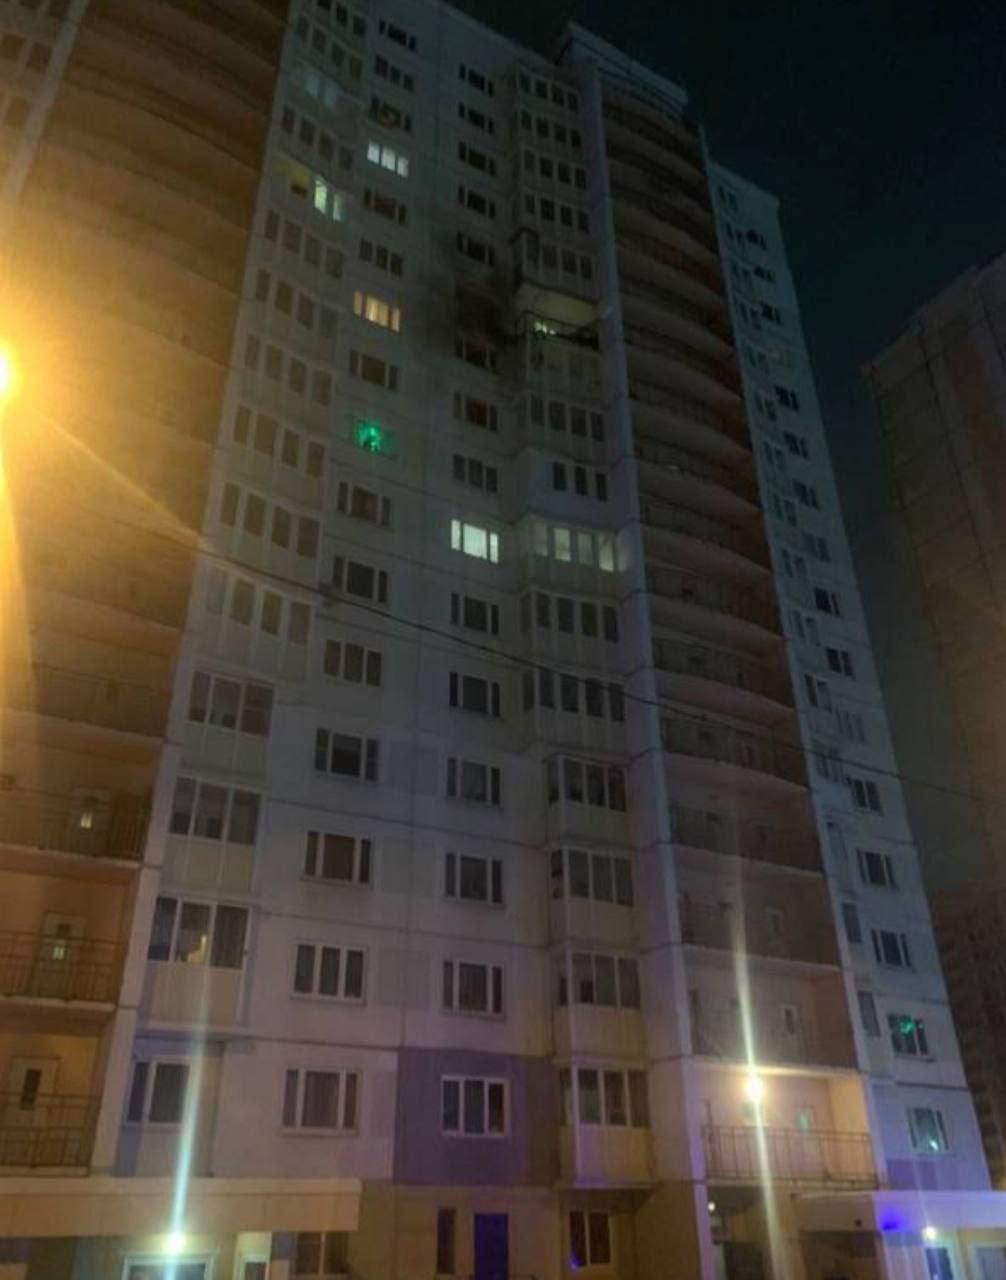 Video of a drone striking a high-rise building in Russian Tula appeared online